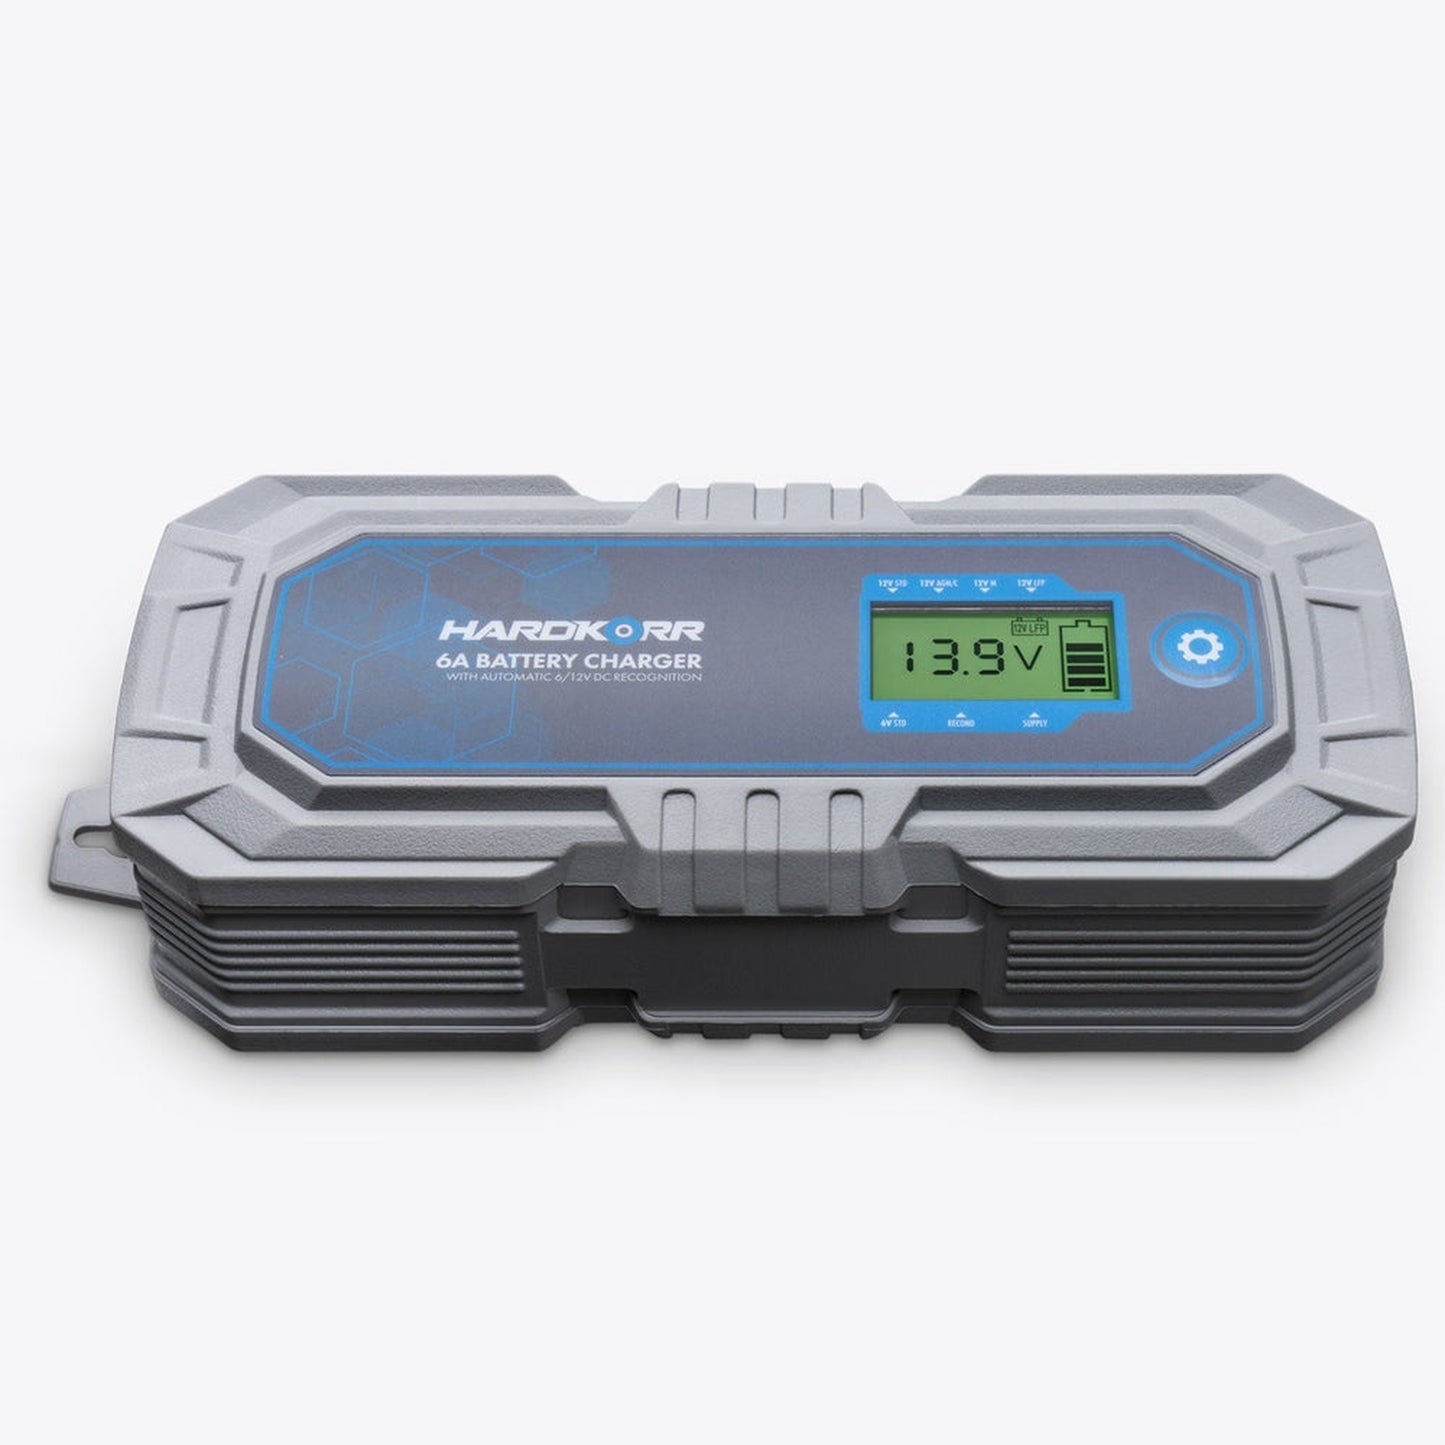 Hard Korr 6A AC Battery Charger with Automatic 6/12V DC Recognition